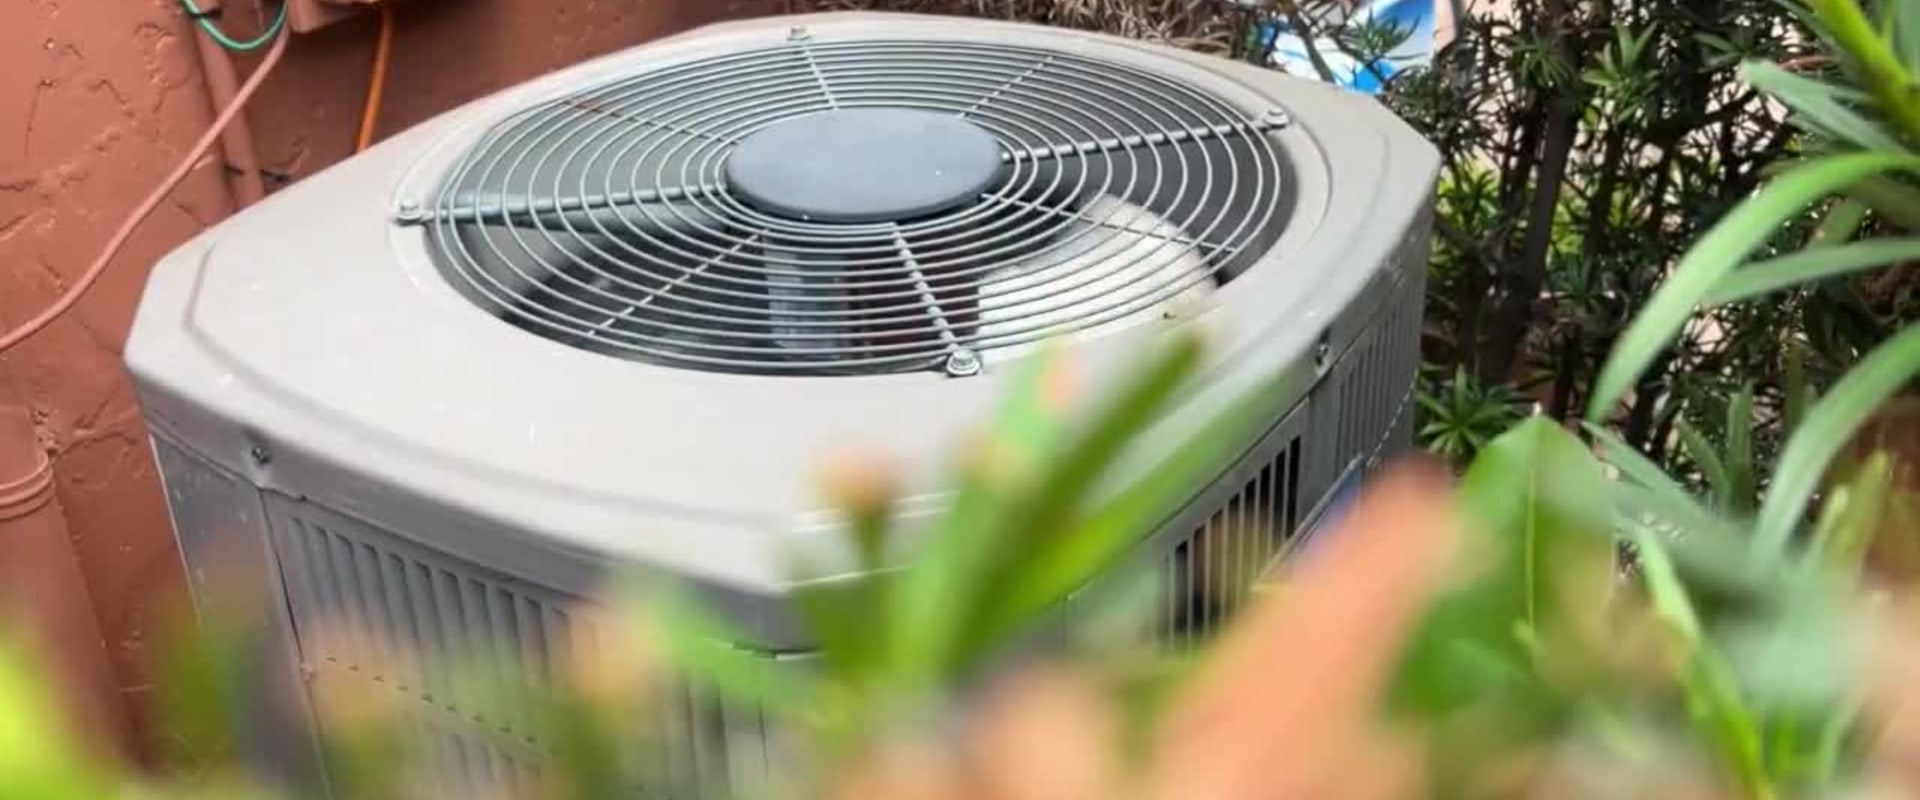 Replacing an Old Air Conditioner in West Palm Beach, FL: What You Need to Know